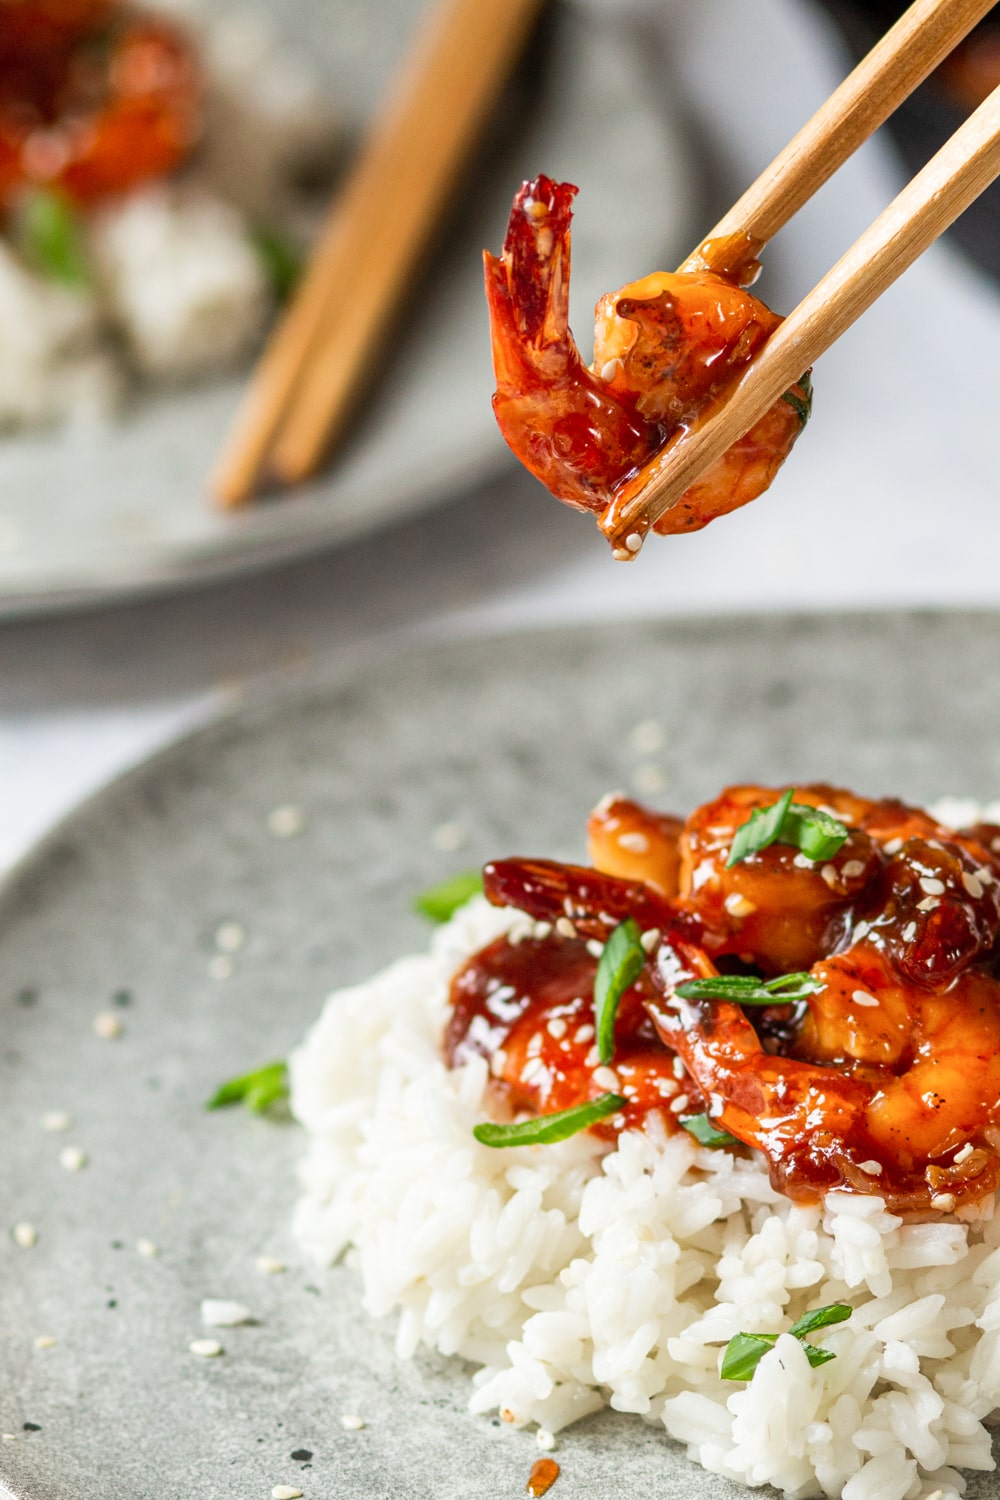 A few pieces of sweet and sour shrimp on a bed of white rice on a grey plate. A pair of chopsticks is holding a piece of shrimp over the shrimp on rice.